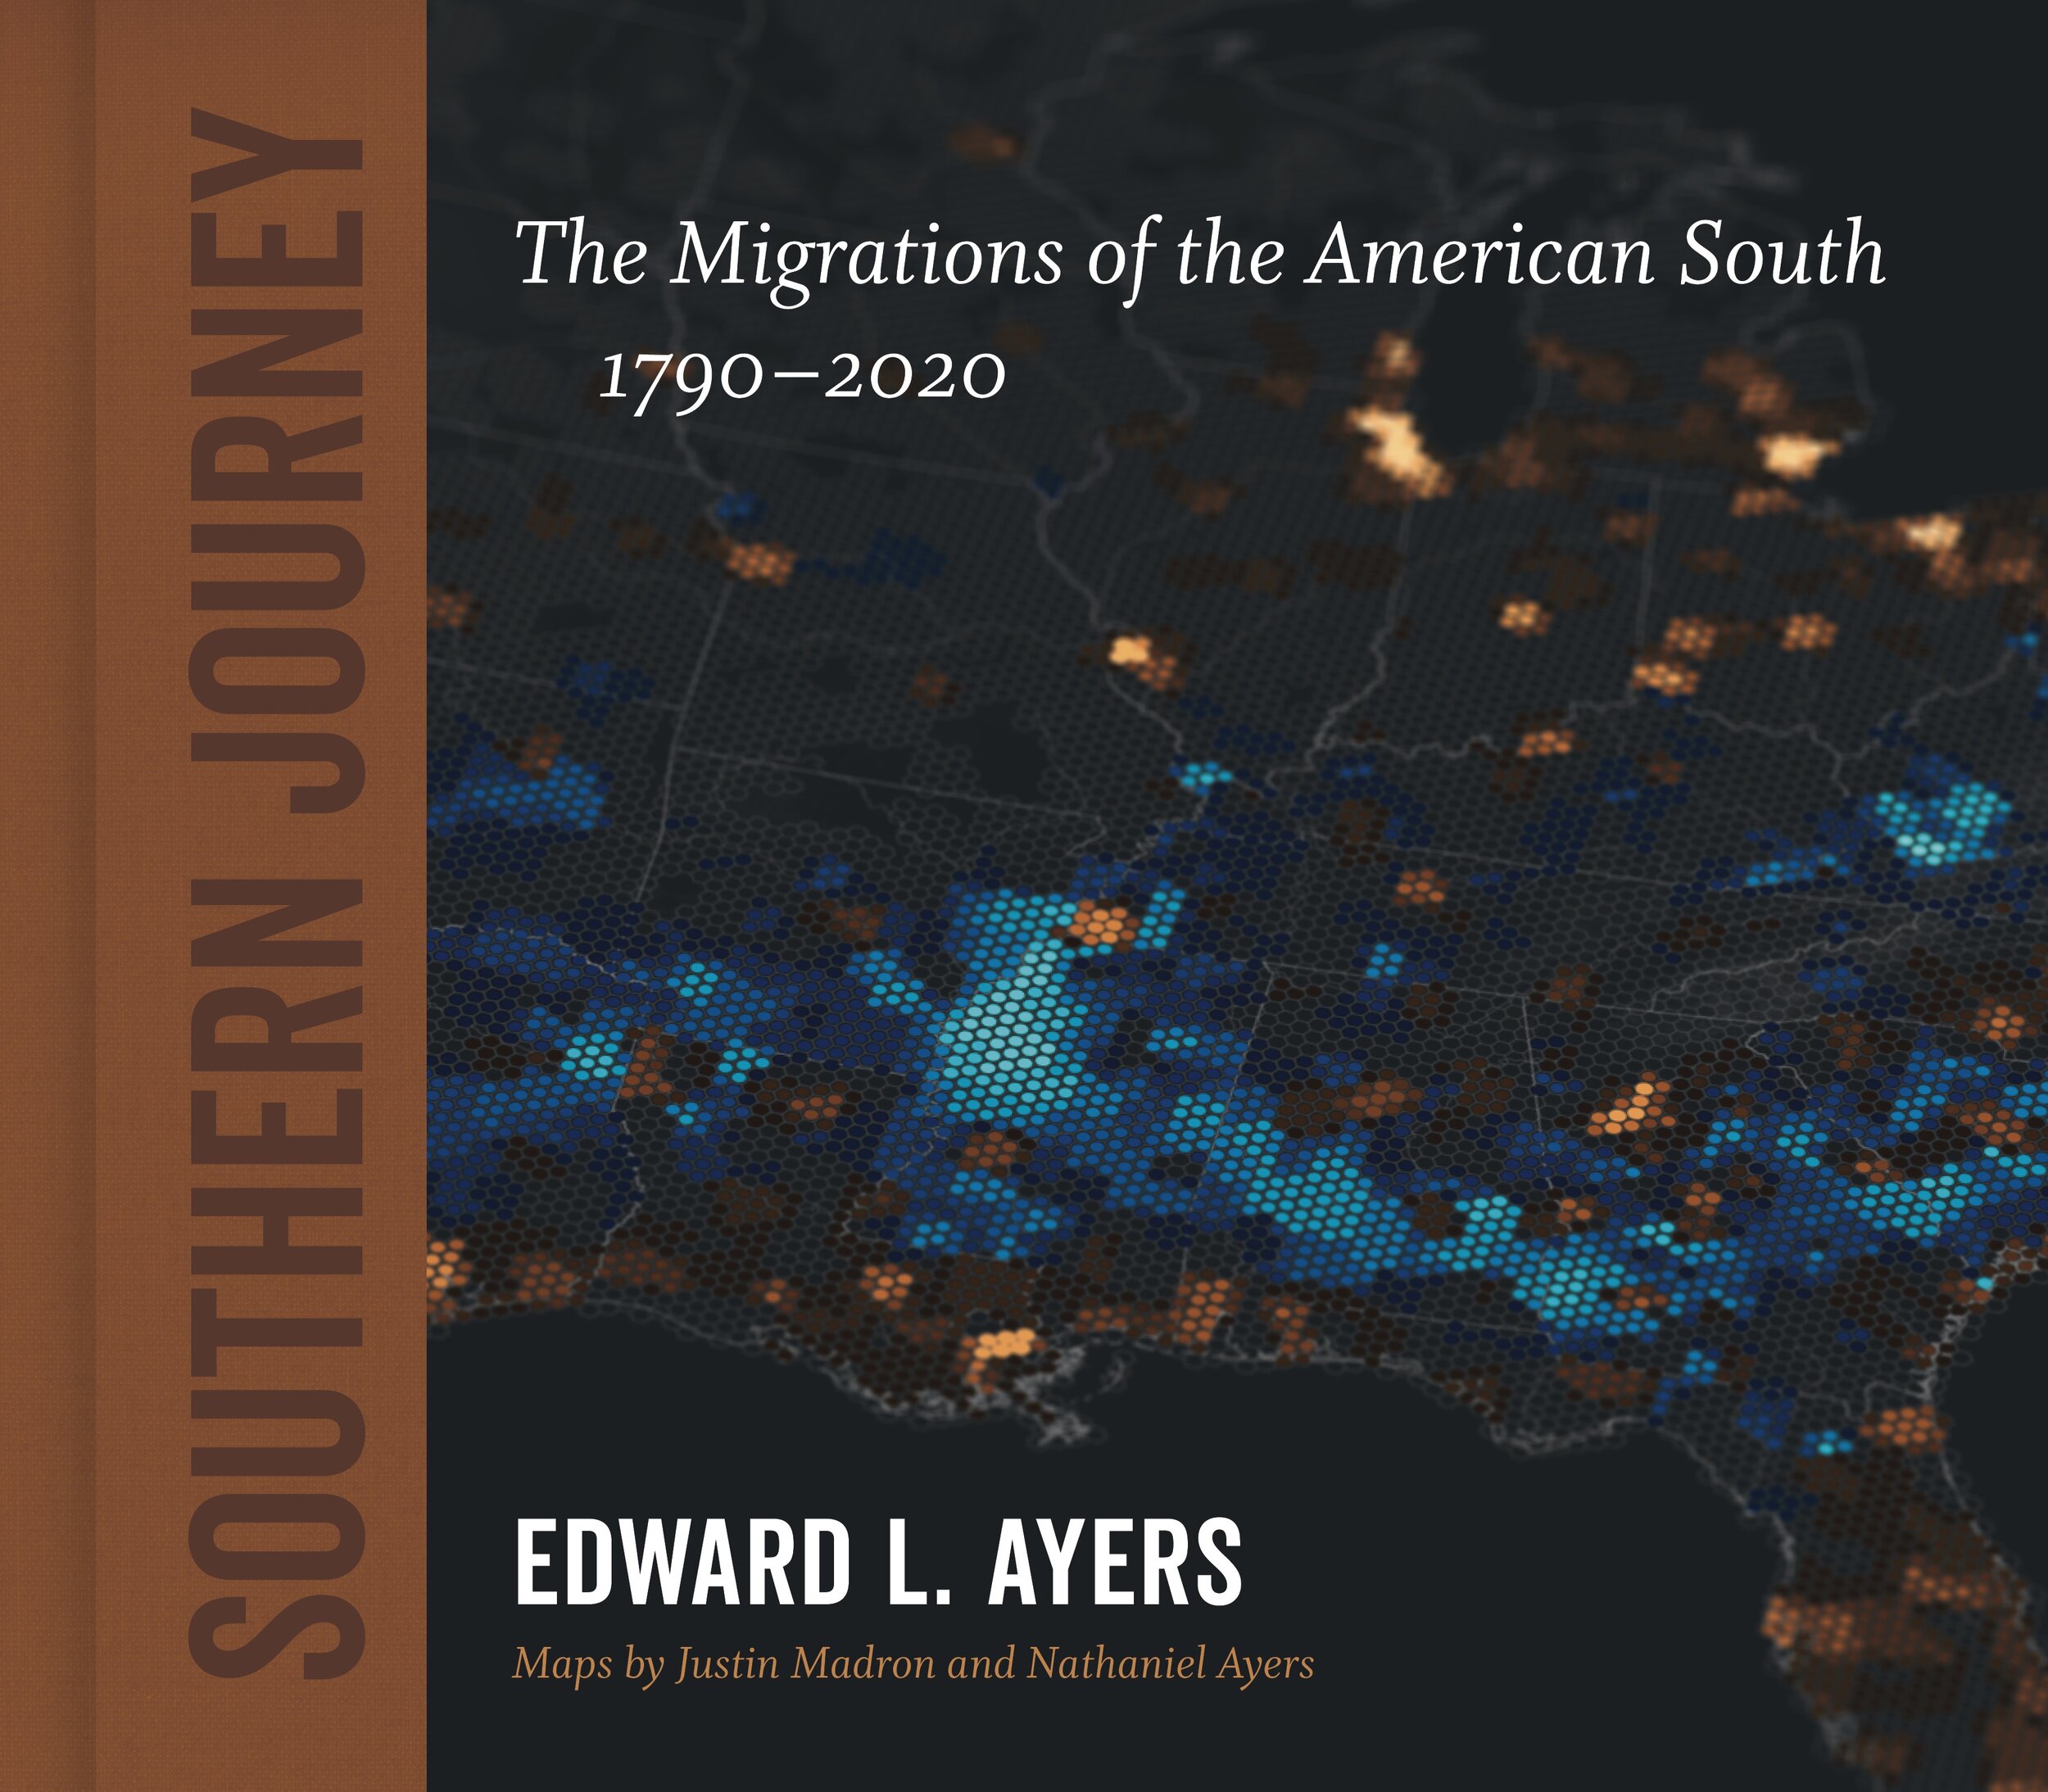 Southern Journey book cover by Ed Ayers high resolution.jpg